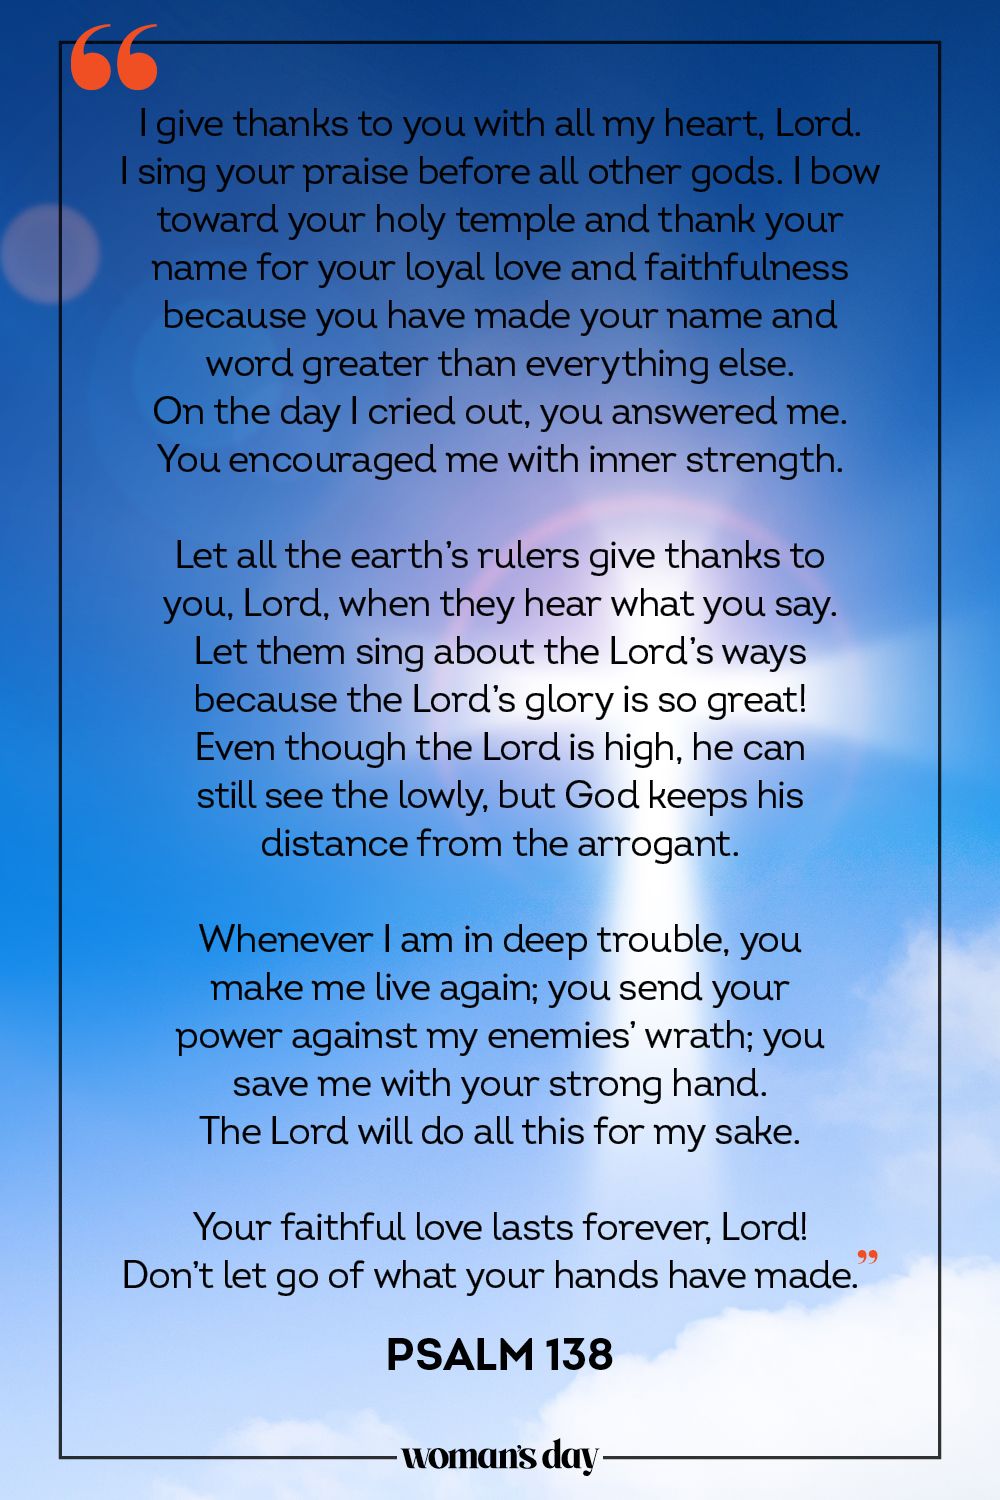 I Love You, Lord - I sing this continually!  I love you lord, Love you,  Christian quotes